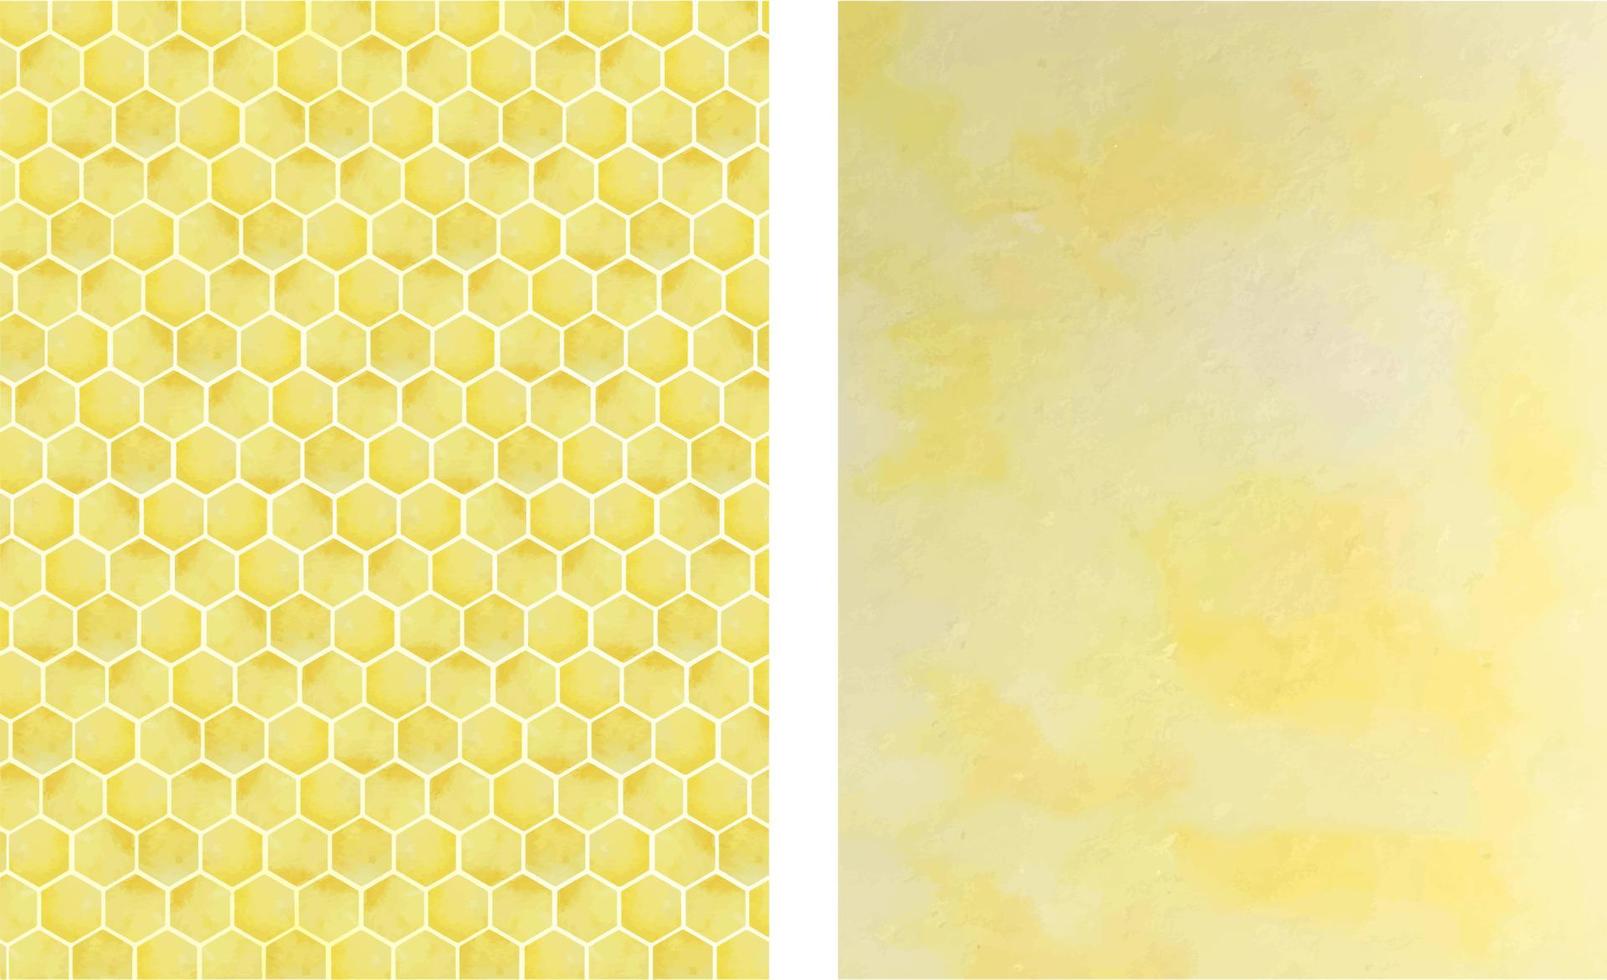 Watercolor abstract geometric pattern with honeycomb. Watercolor yellow hexagon with texture of stain, spray, splash and spot, fashion elements vector